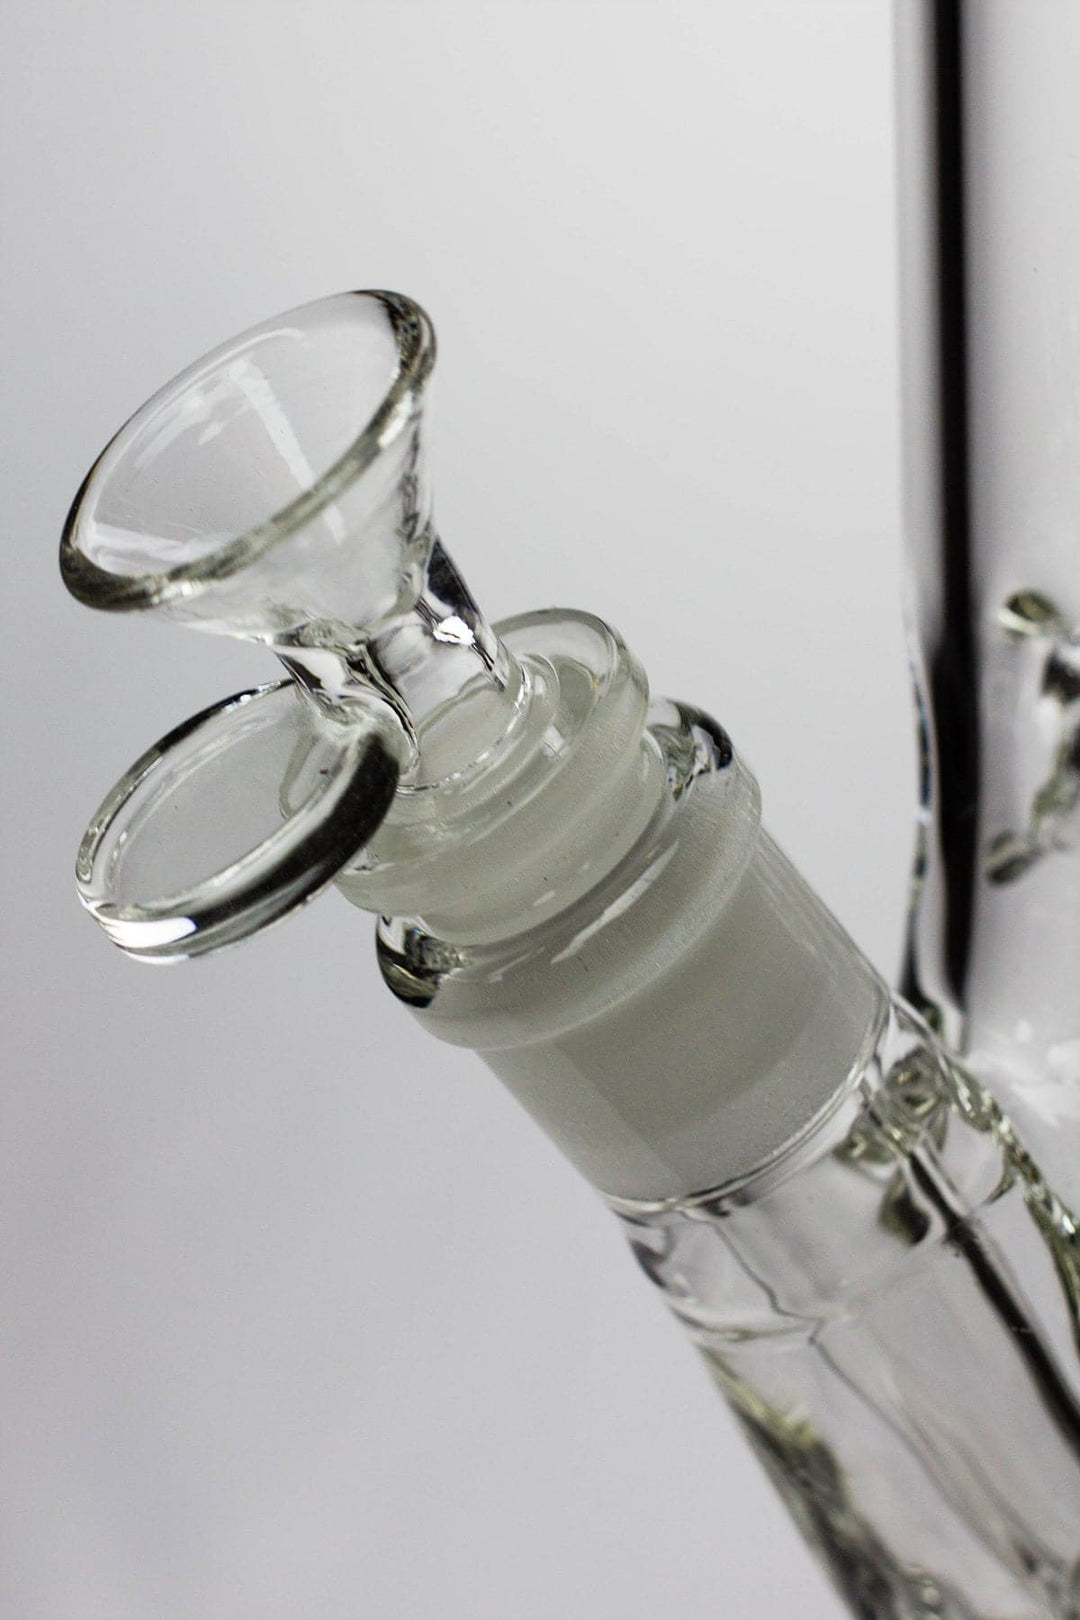 12" glass tube water pipes_5